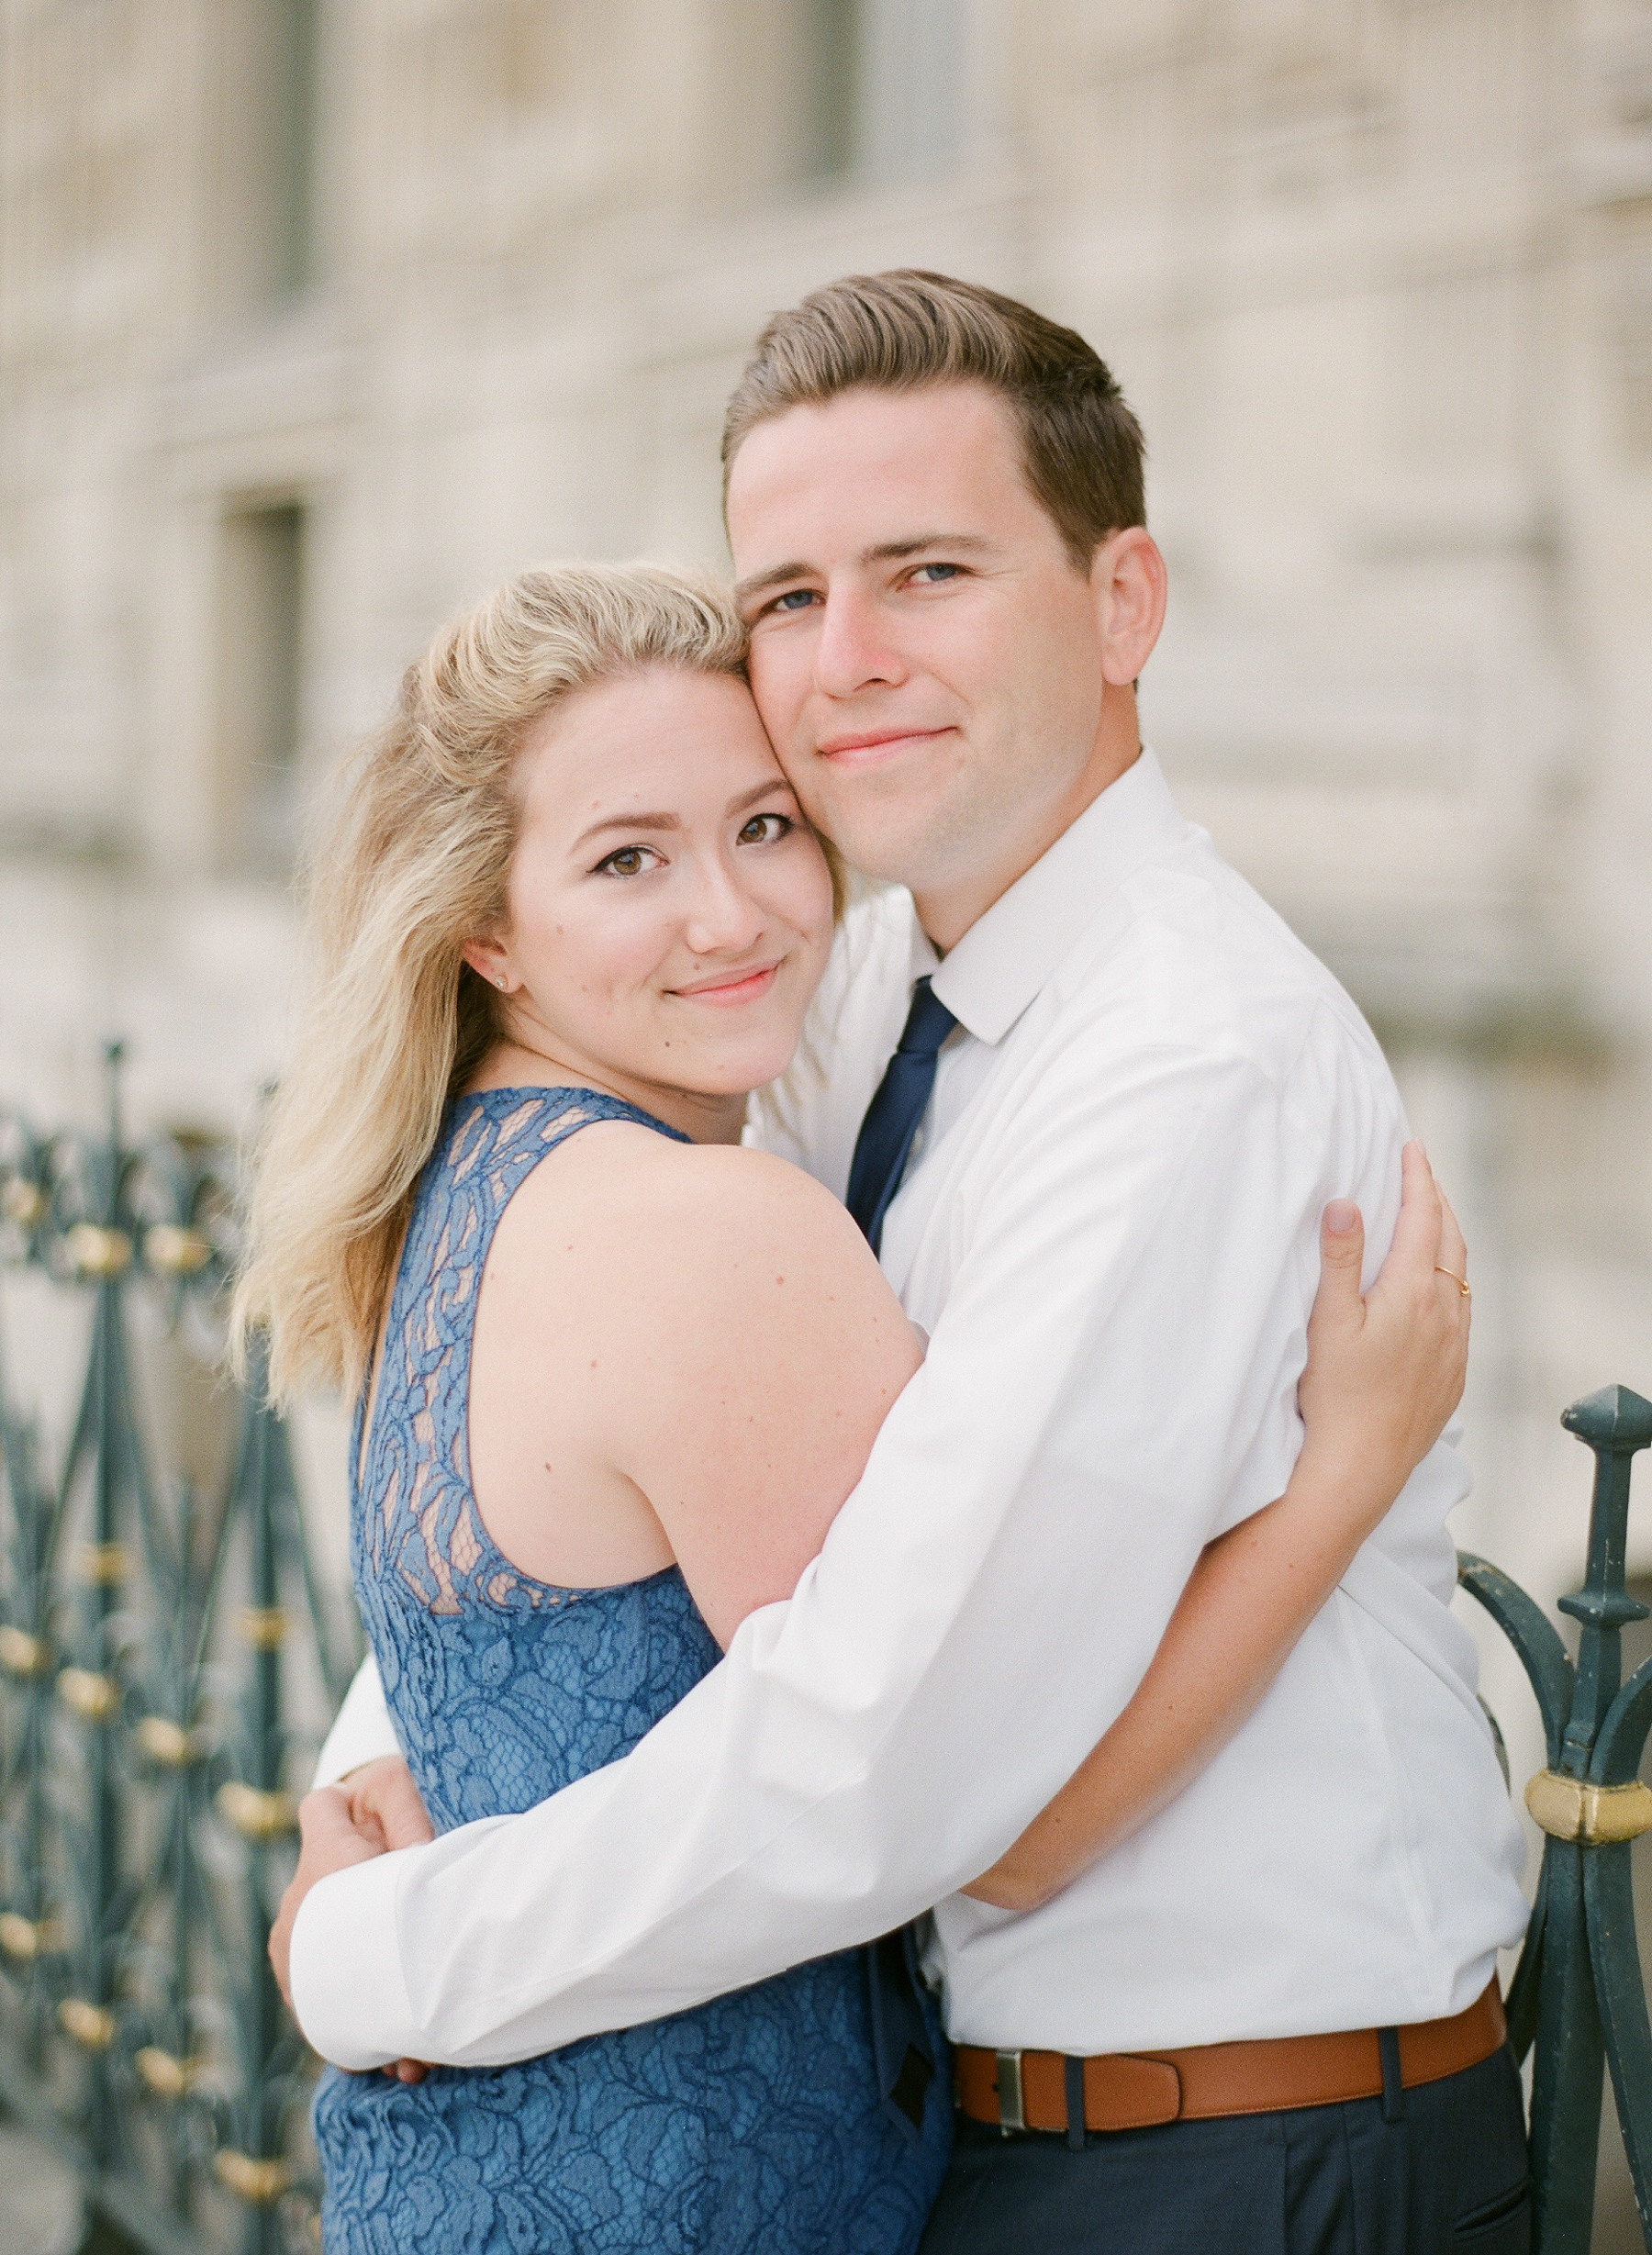 Paris Honeymoon Photographer | France Wedding Photographer | Paris Film Photography | Molly Carr Photography | Engagement Session At The Louvre | Bride And Groom Hugging | Girl In Blue Lace JCrew Dress